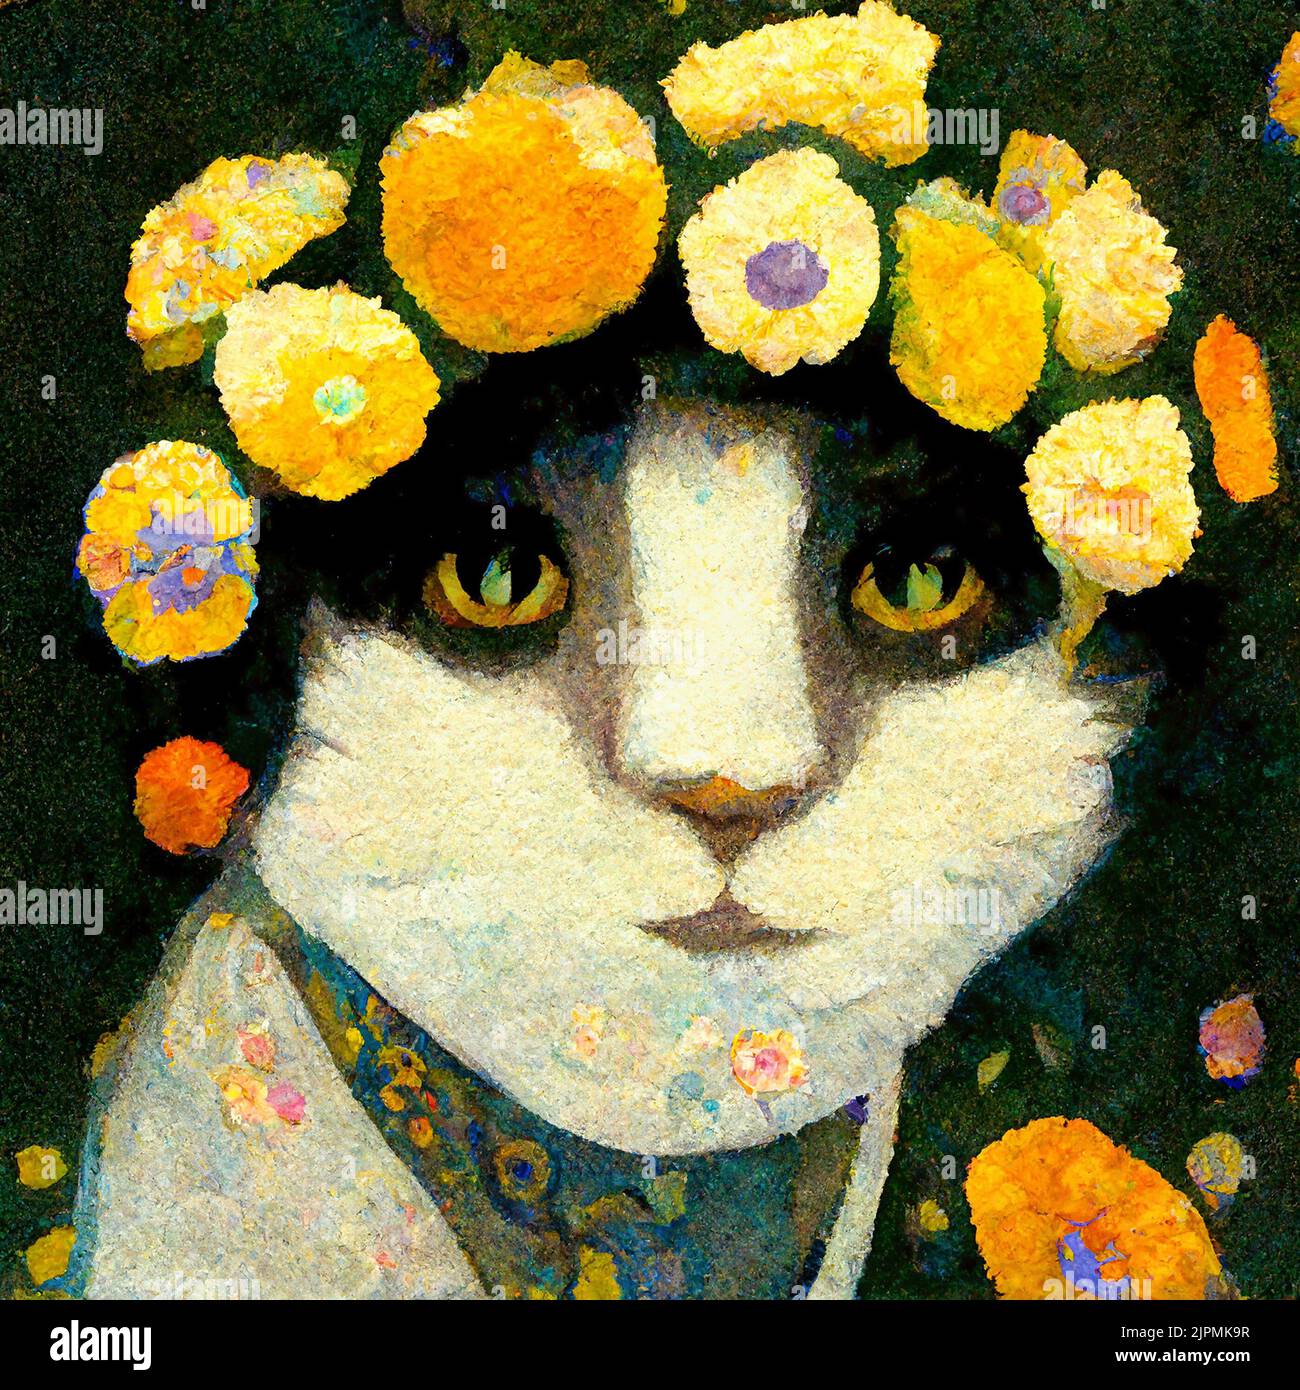 Portrait of a cat with daisies flowers around. Painted in art nouveau design Stock Photo